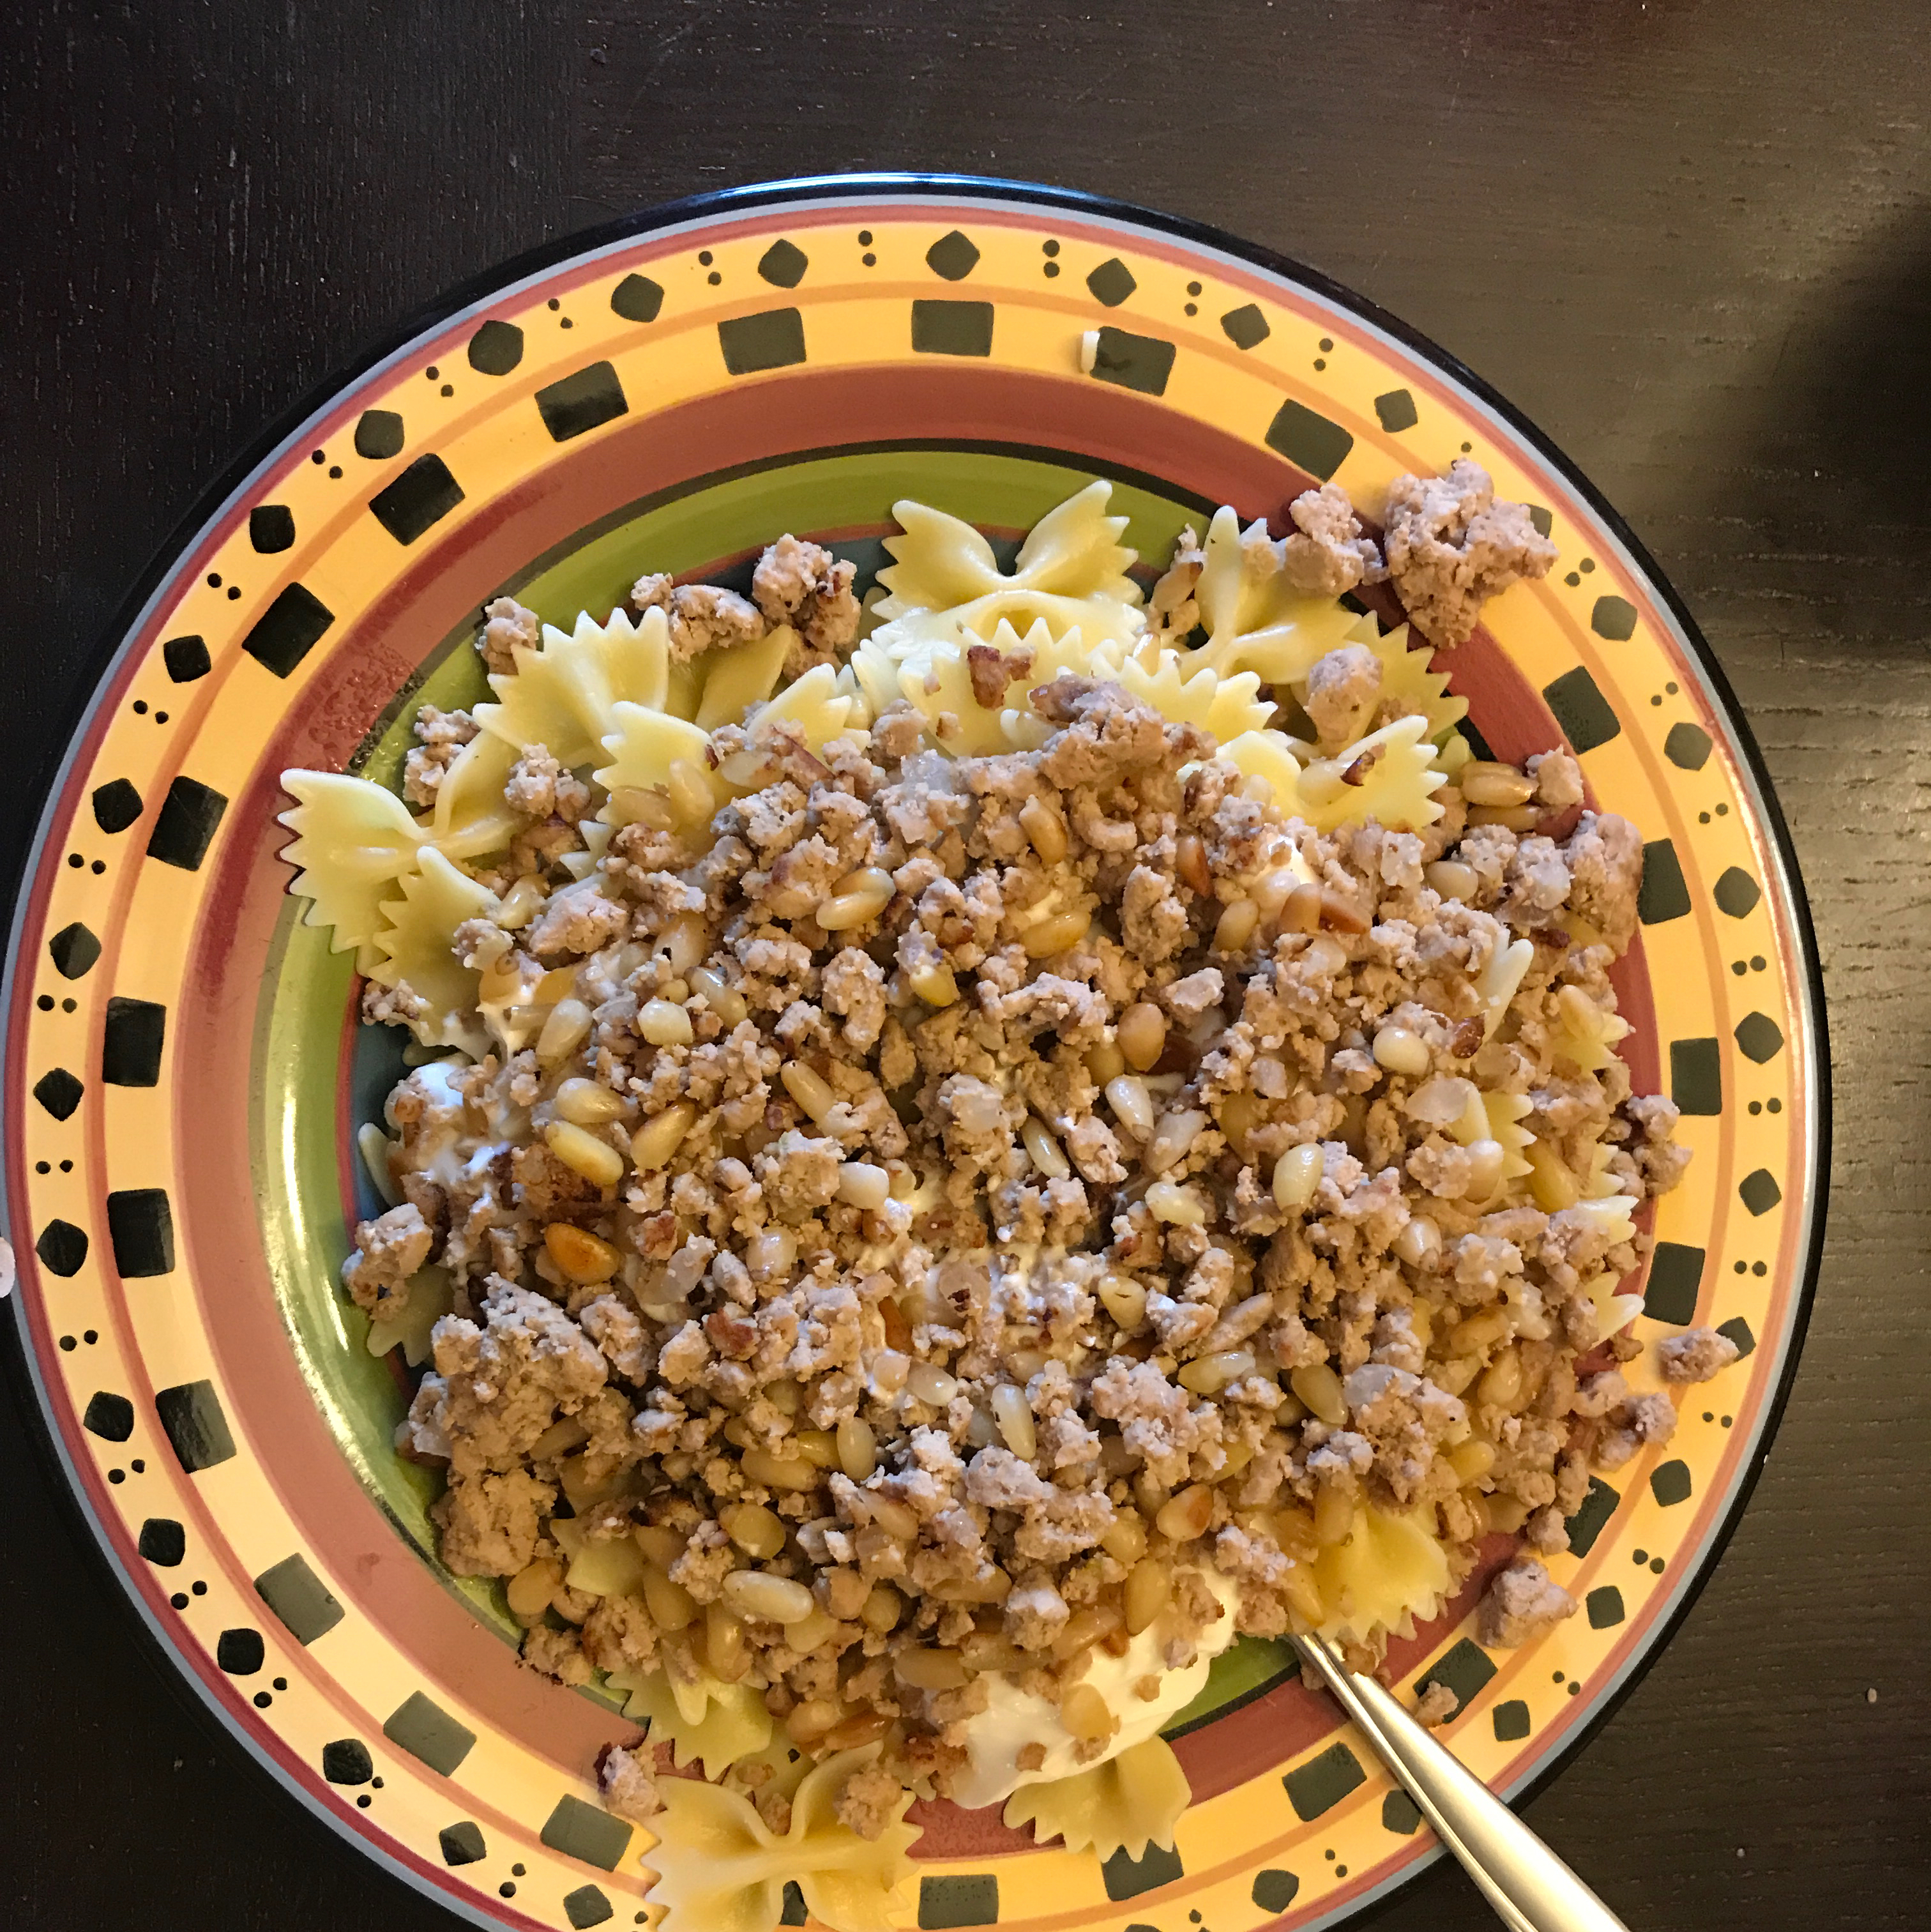 Middle Eastern Pasta With Yogurt and Pine Nuts